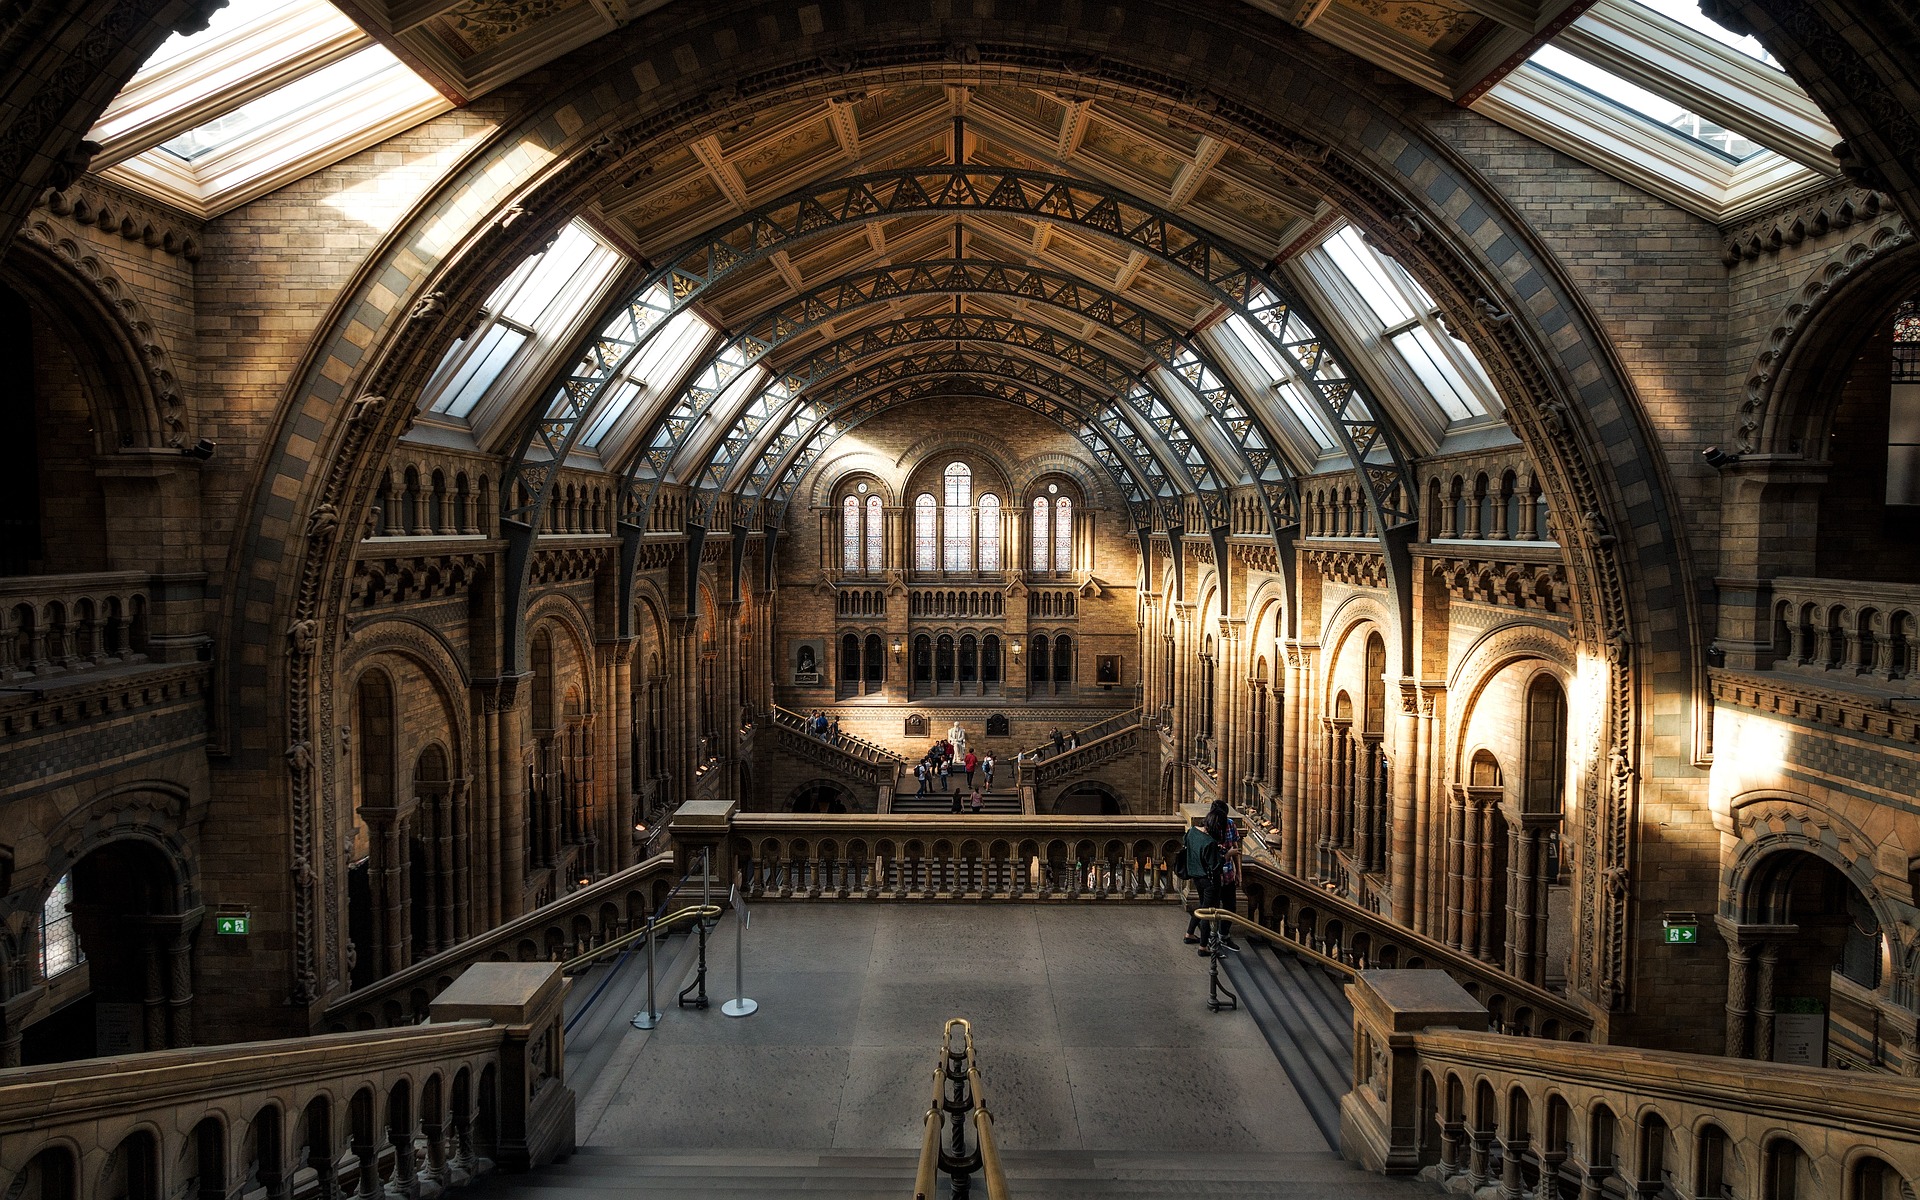 Image of the Natural History Museum